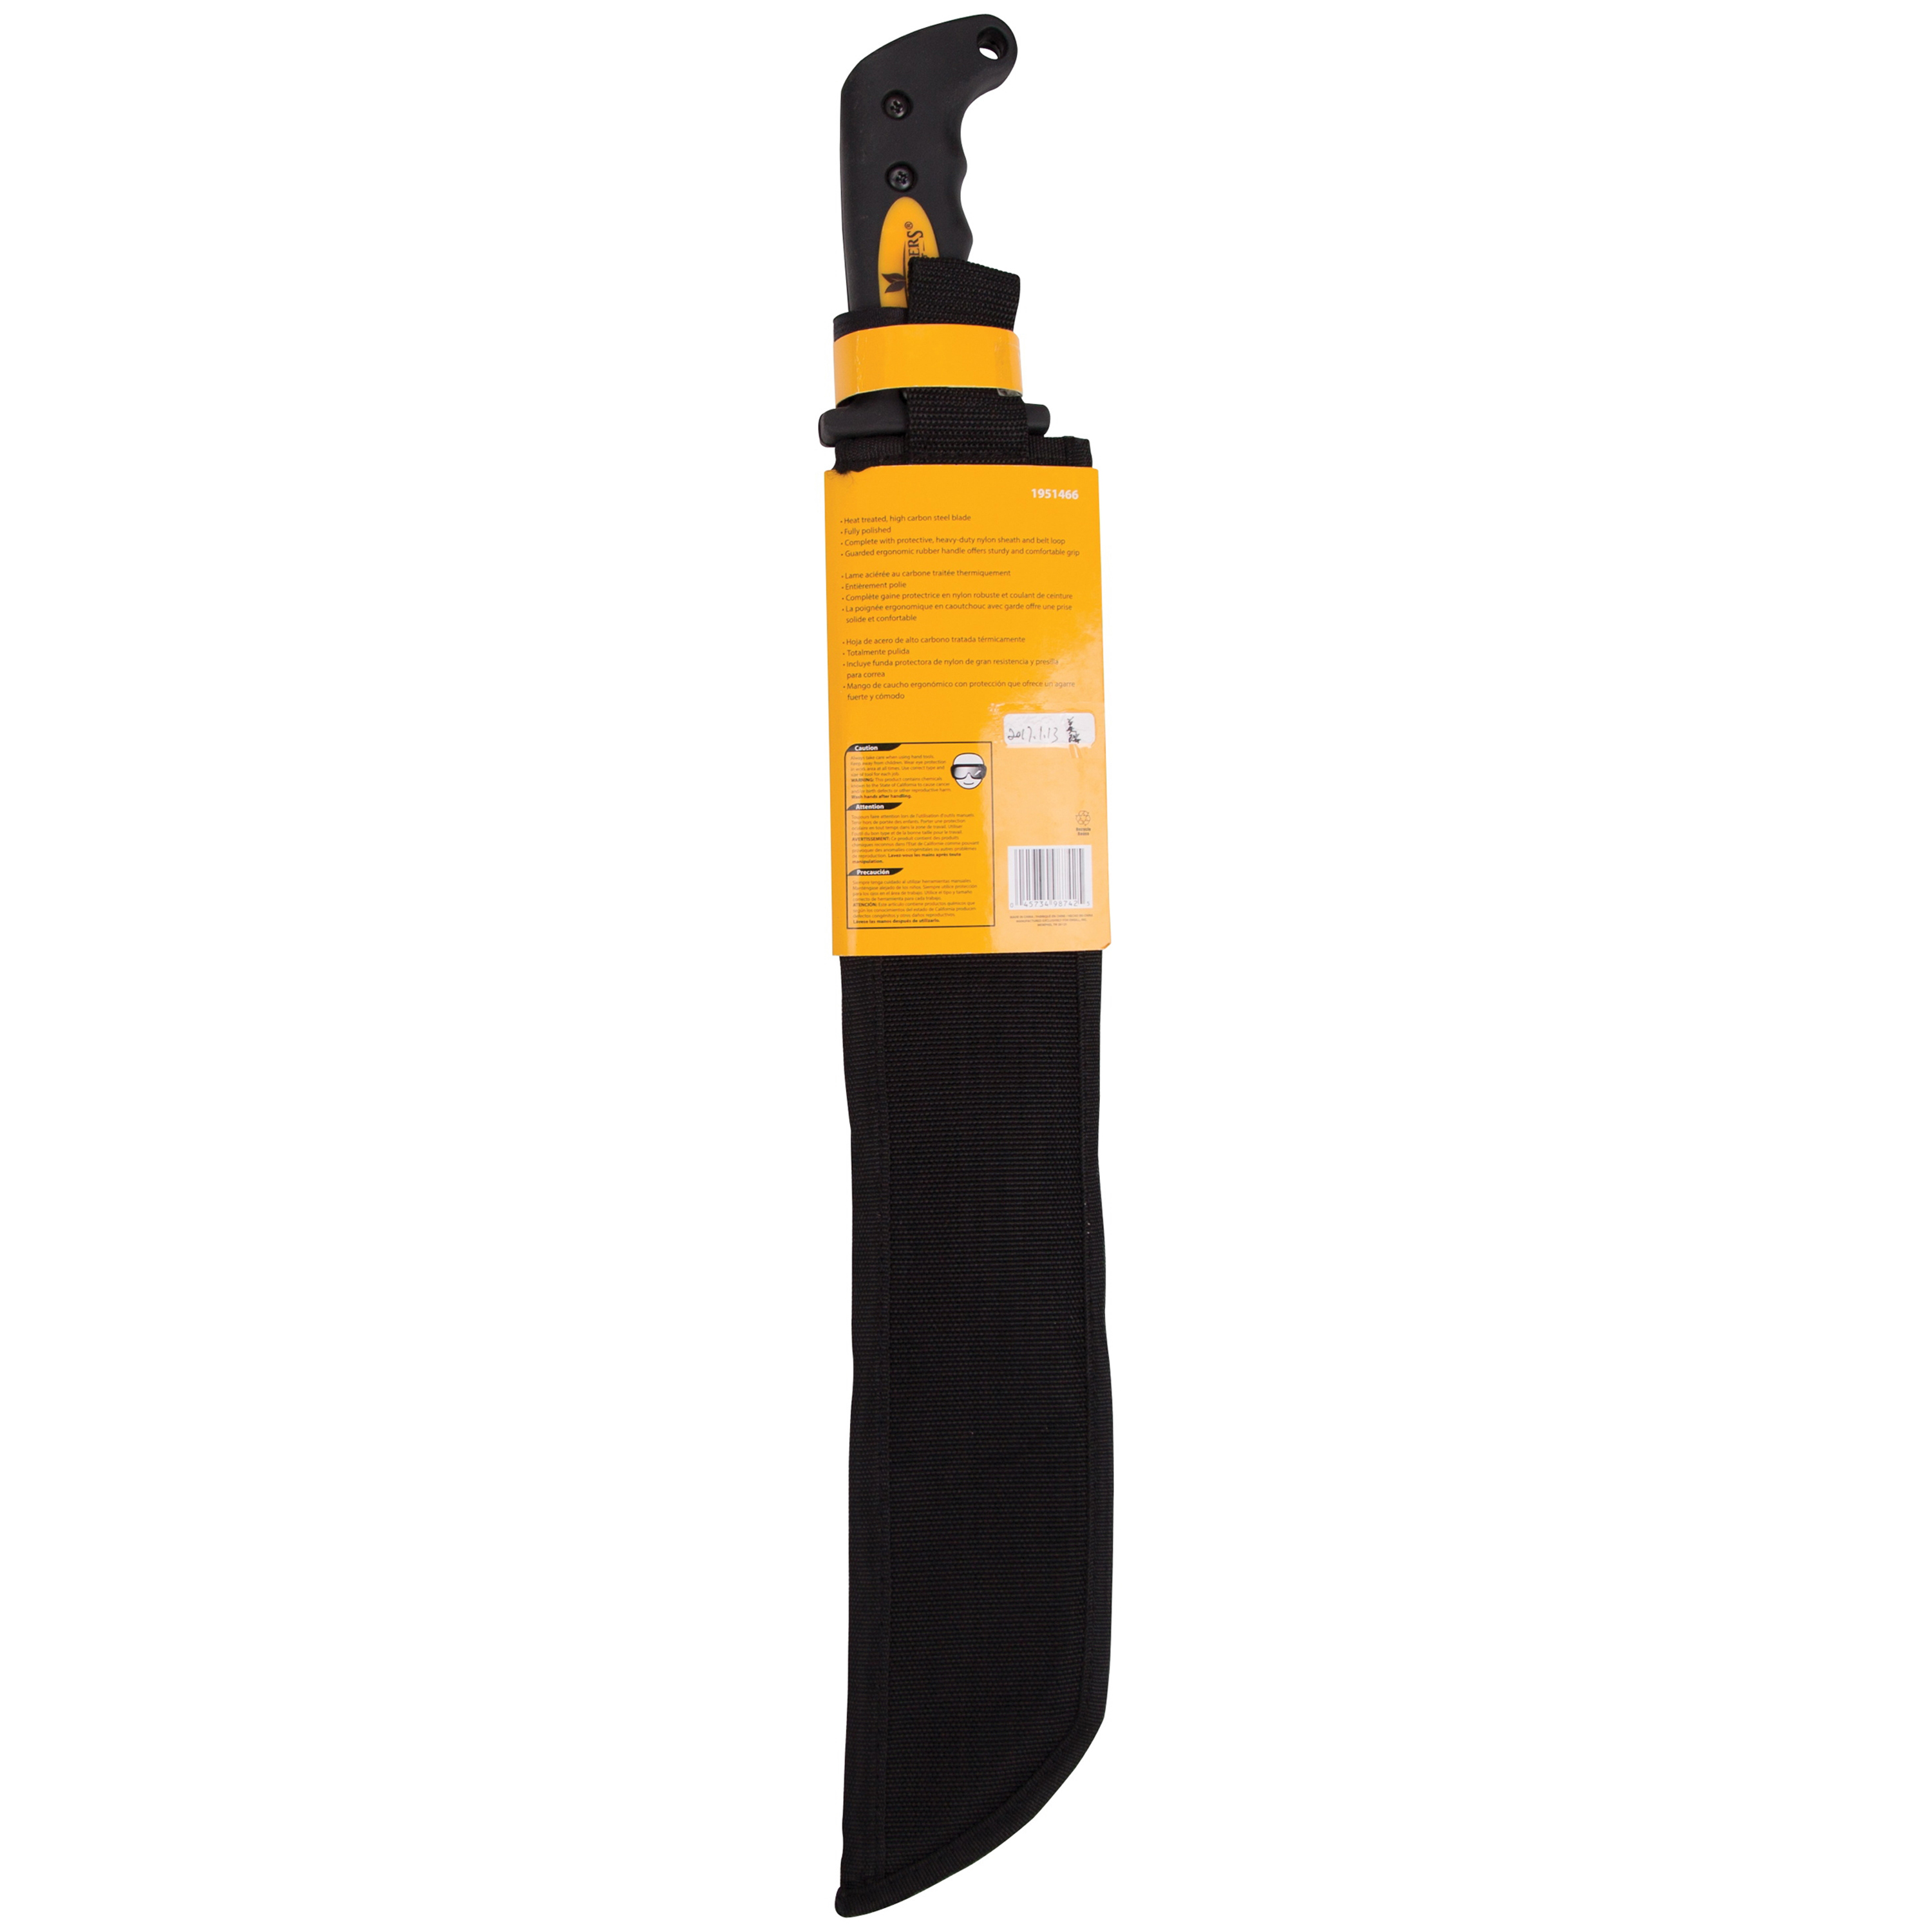 Landscapers Select JLO-006-N3L 18 in Blade, 23-1/2 in OAL, 18 in Blade, High Carbon Steel Blade, Rubber Handle - 3